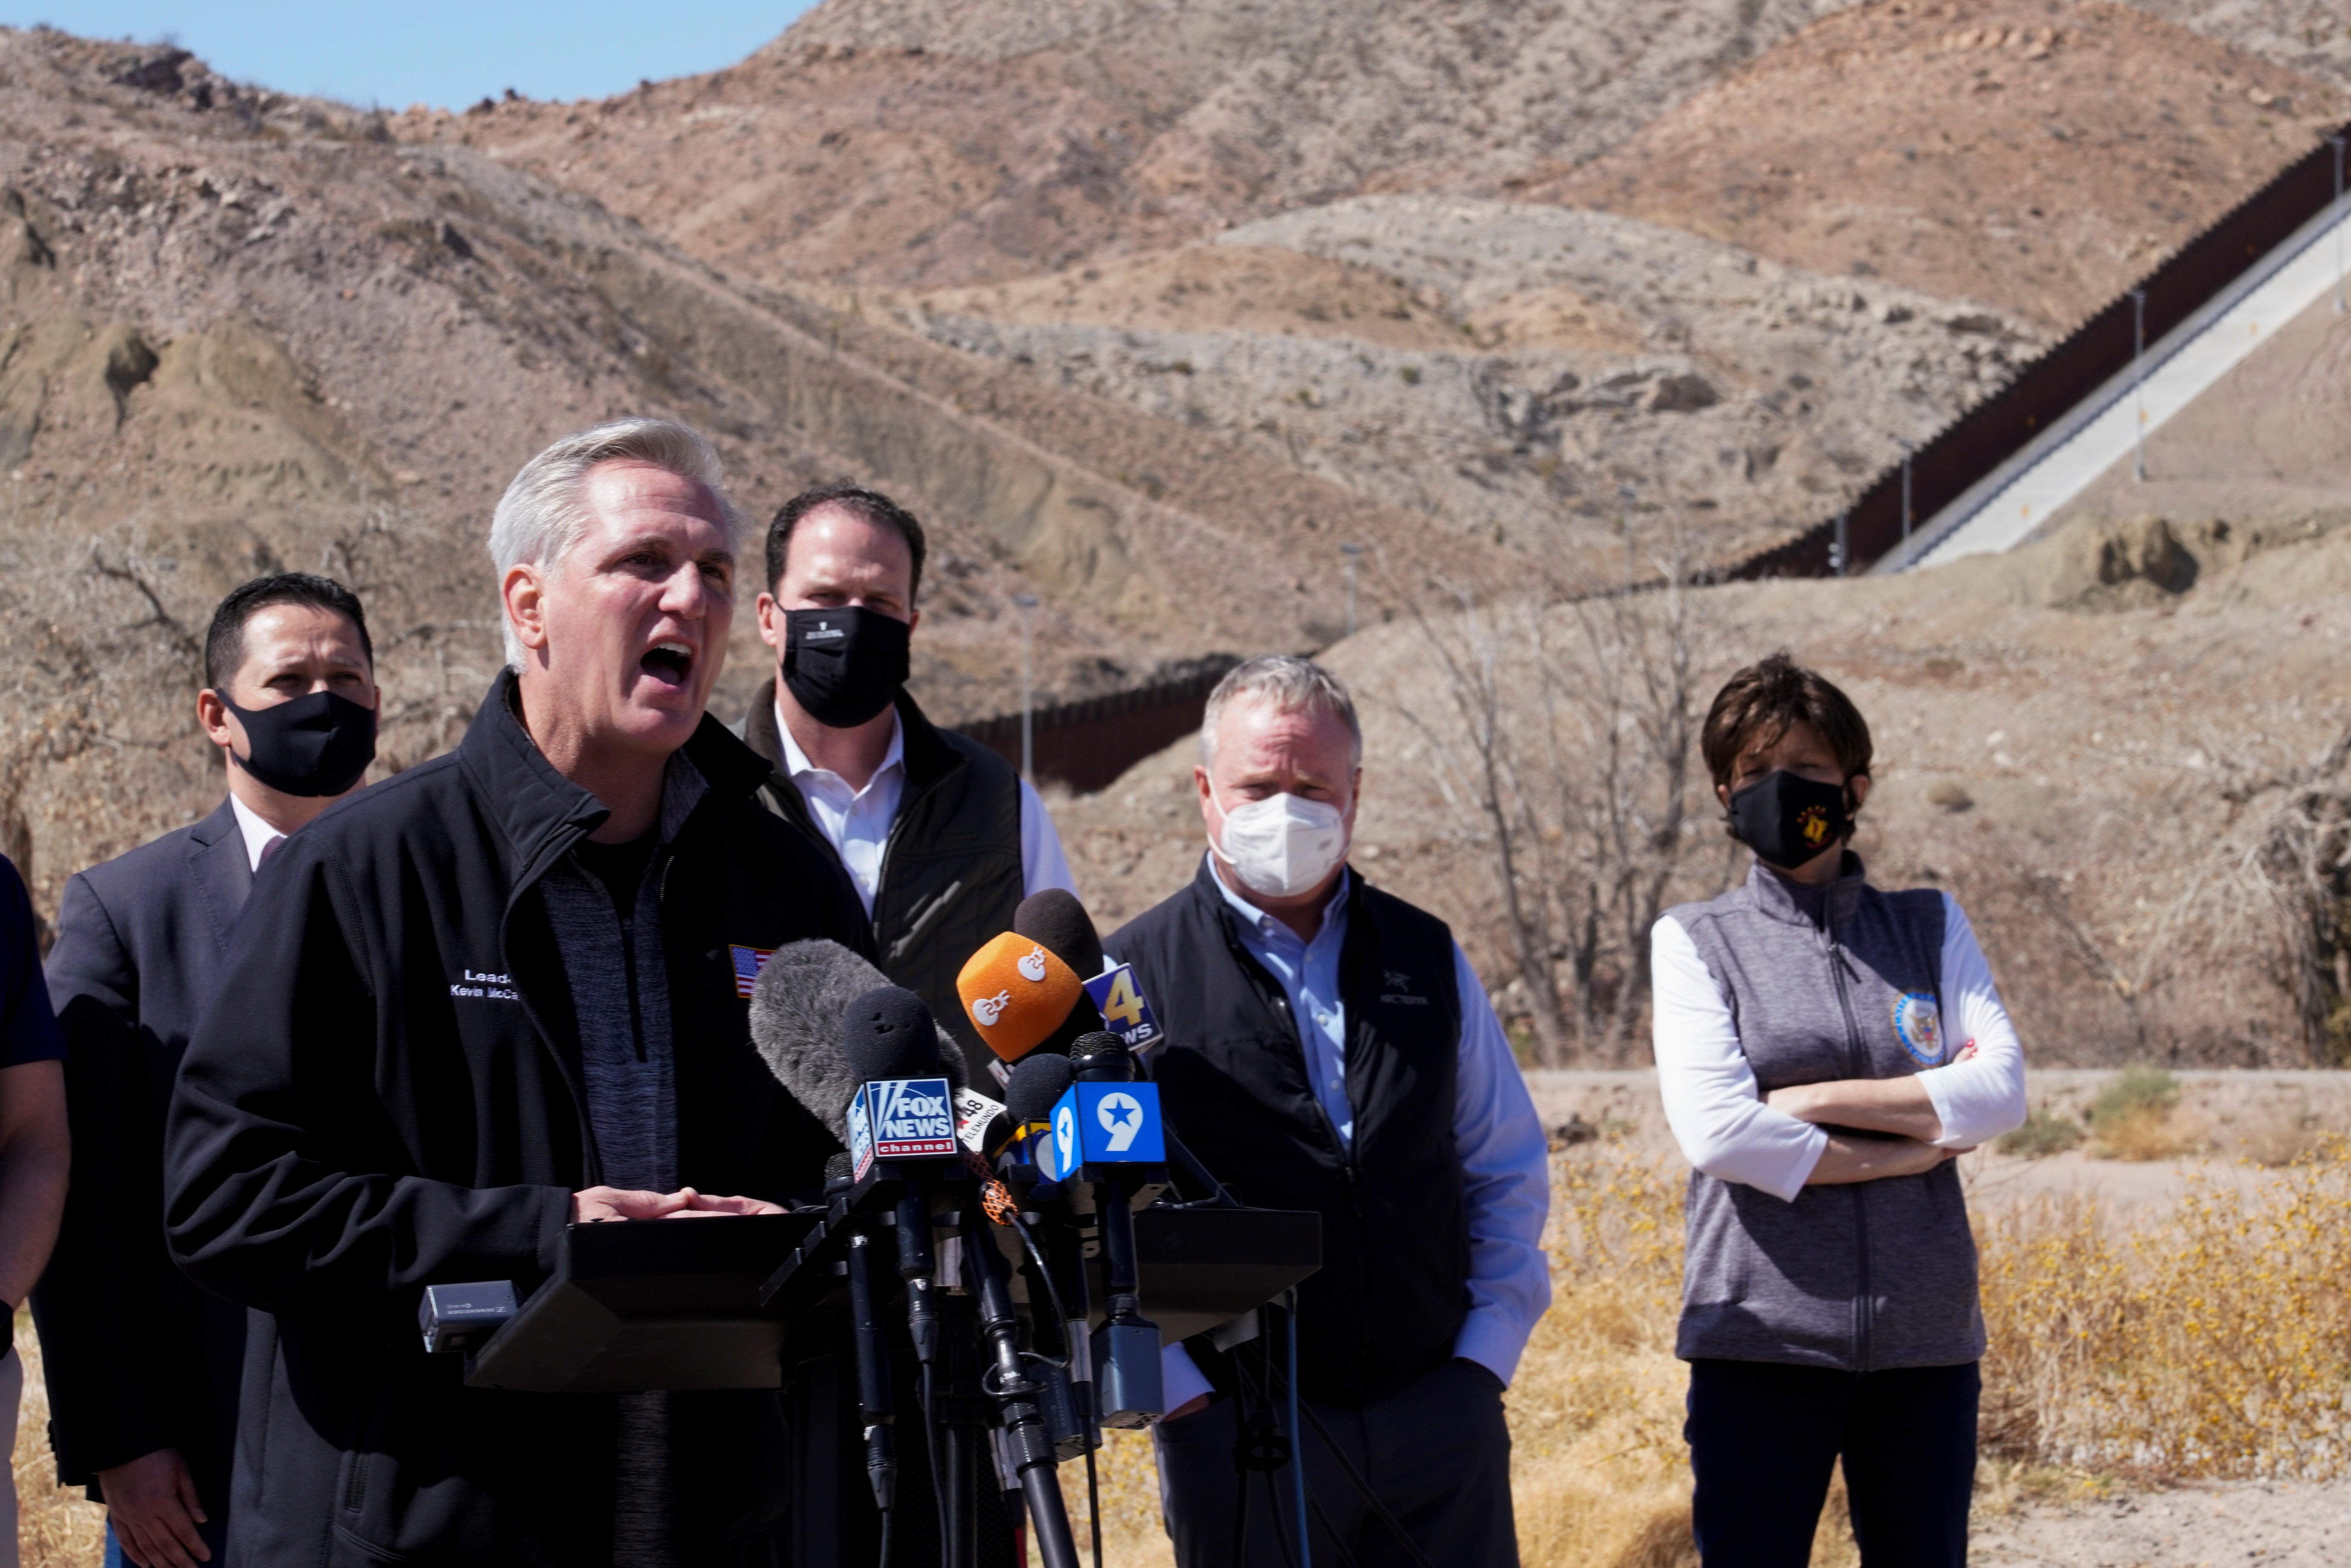 House Minority Leader Kevin McCarthy speaks to the press during a tour for a delegation of Republican lawmakers of the US-Mexico border, in El Paso